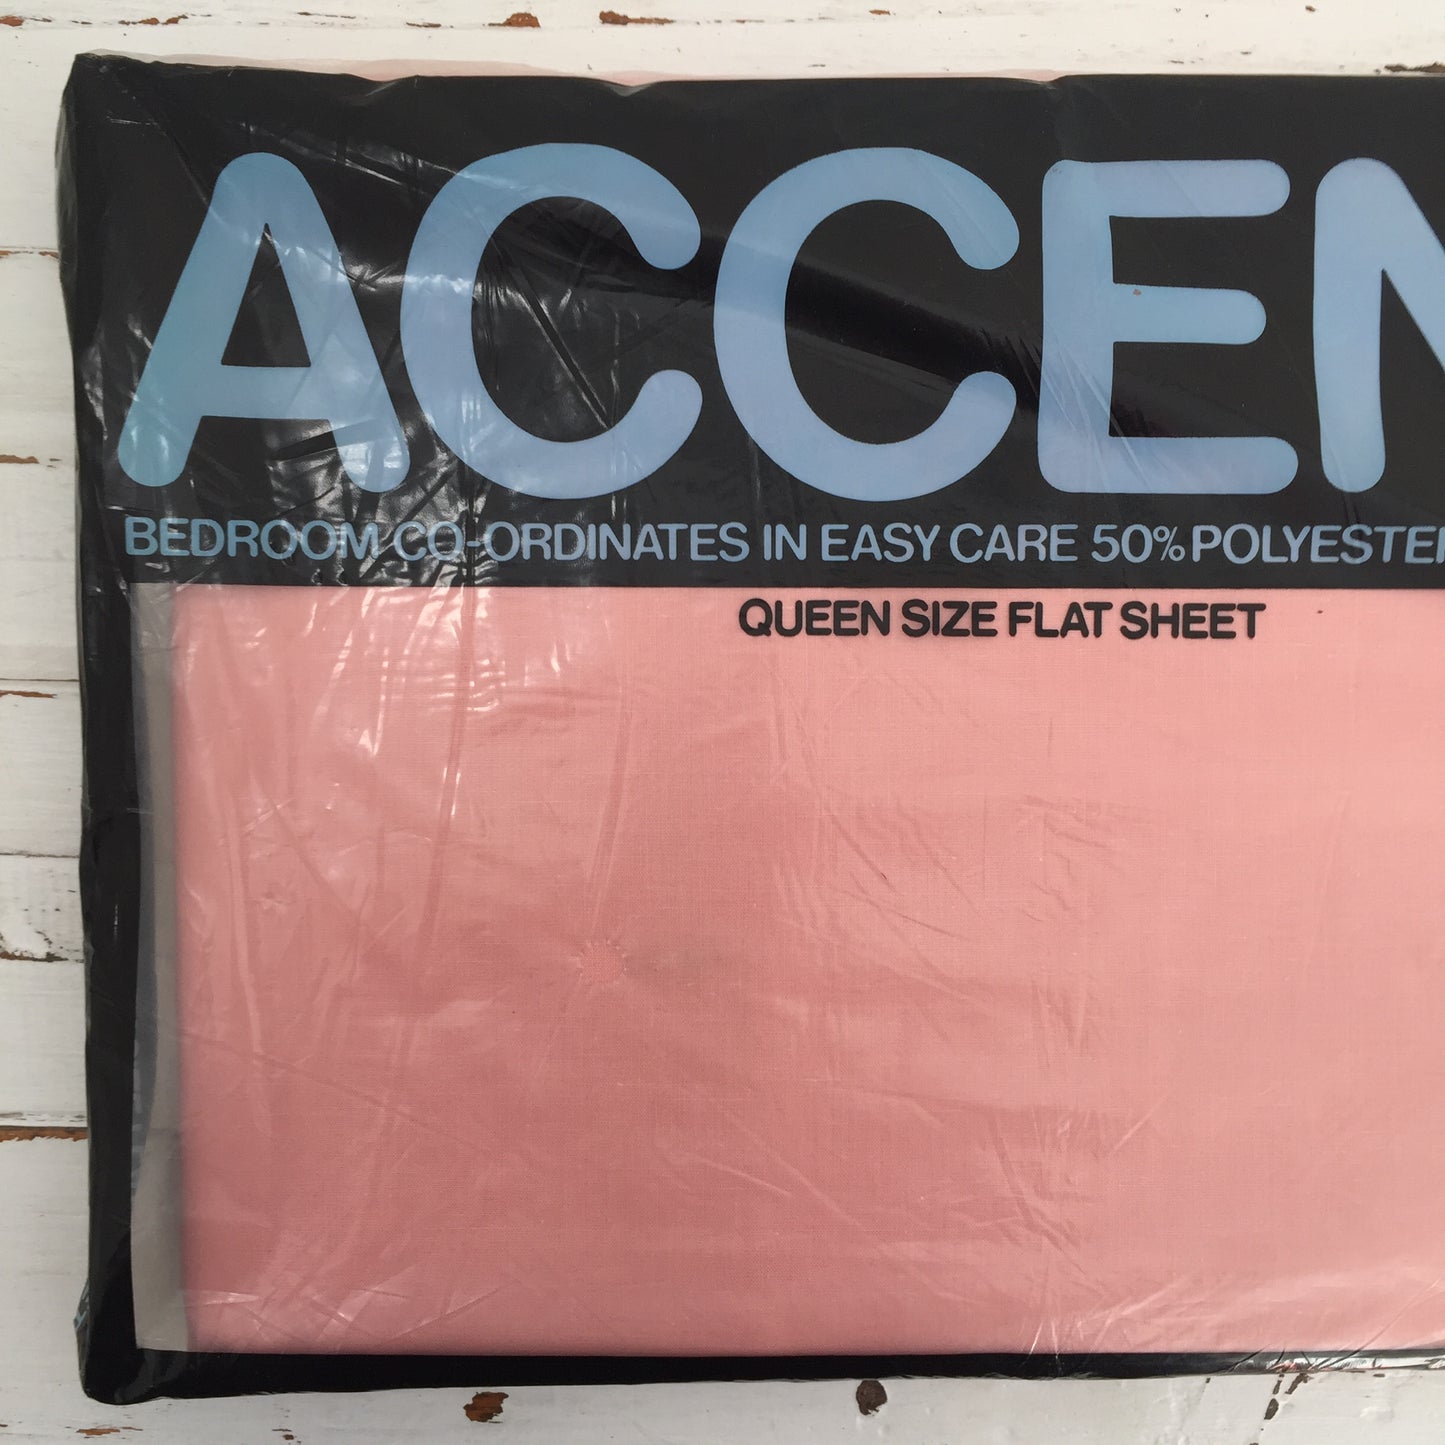 ACCENT Queen Size Flat Sheet Cotton Blend RETRO Home Bed